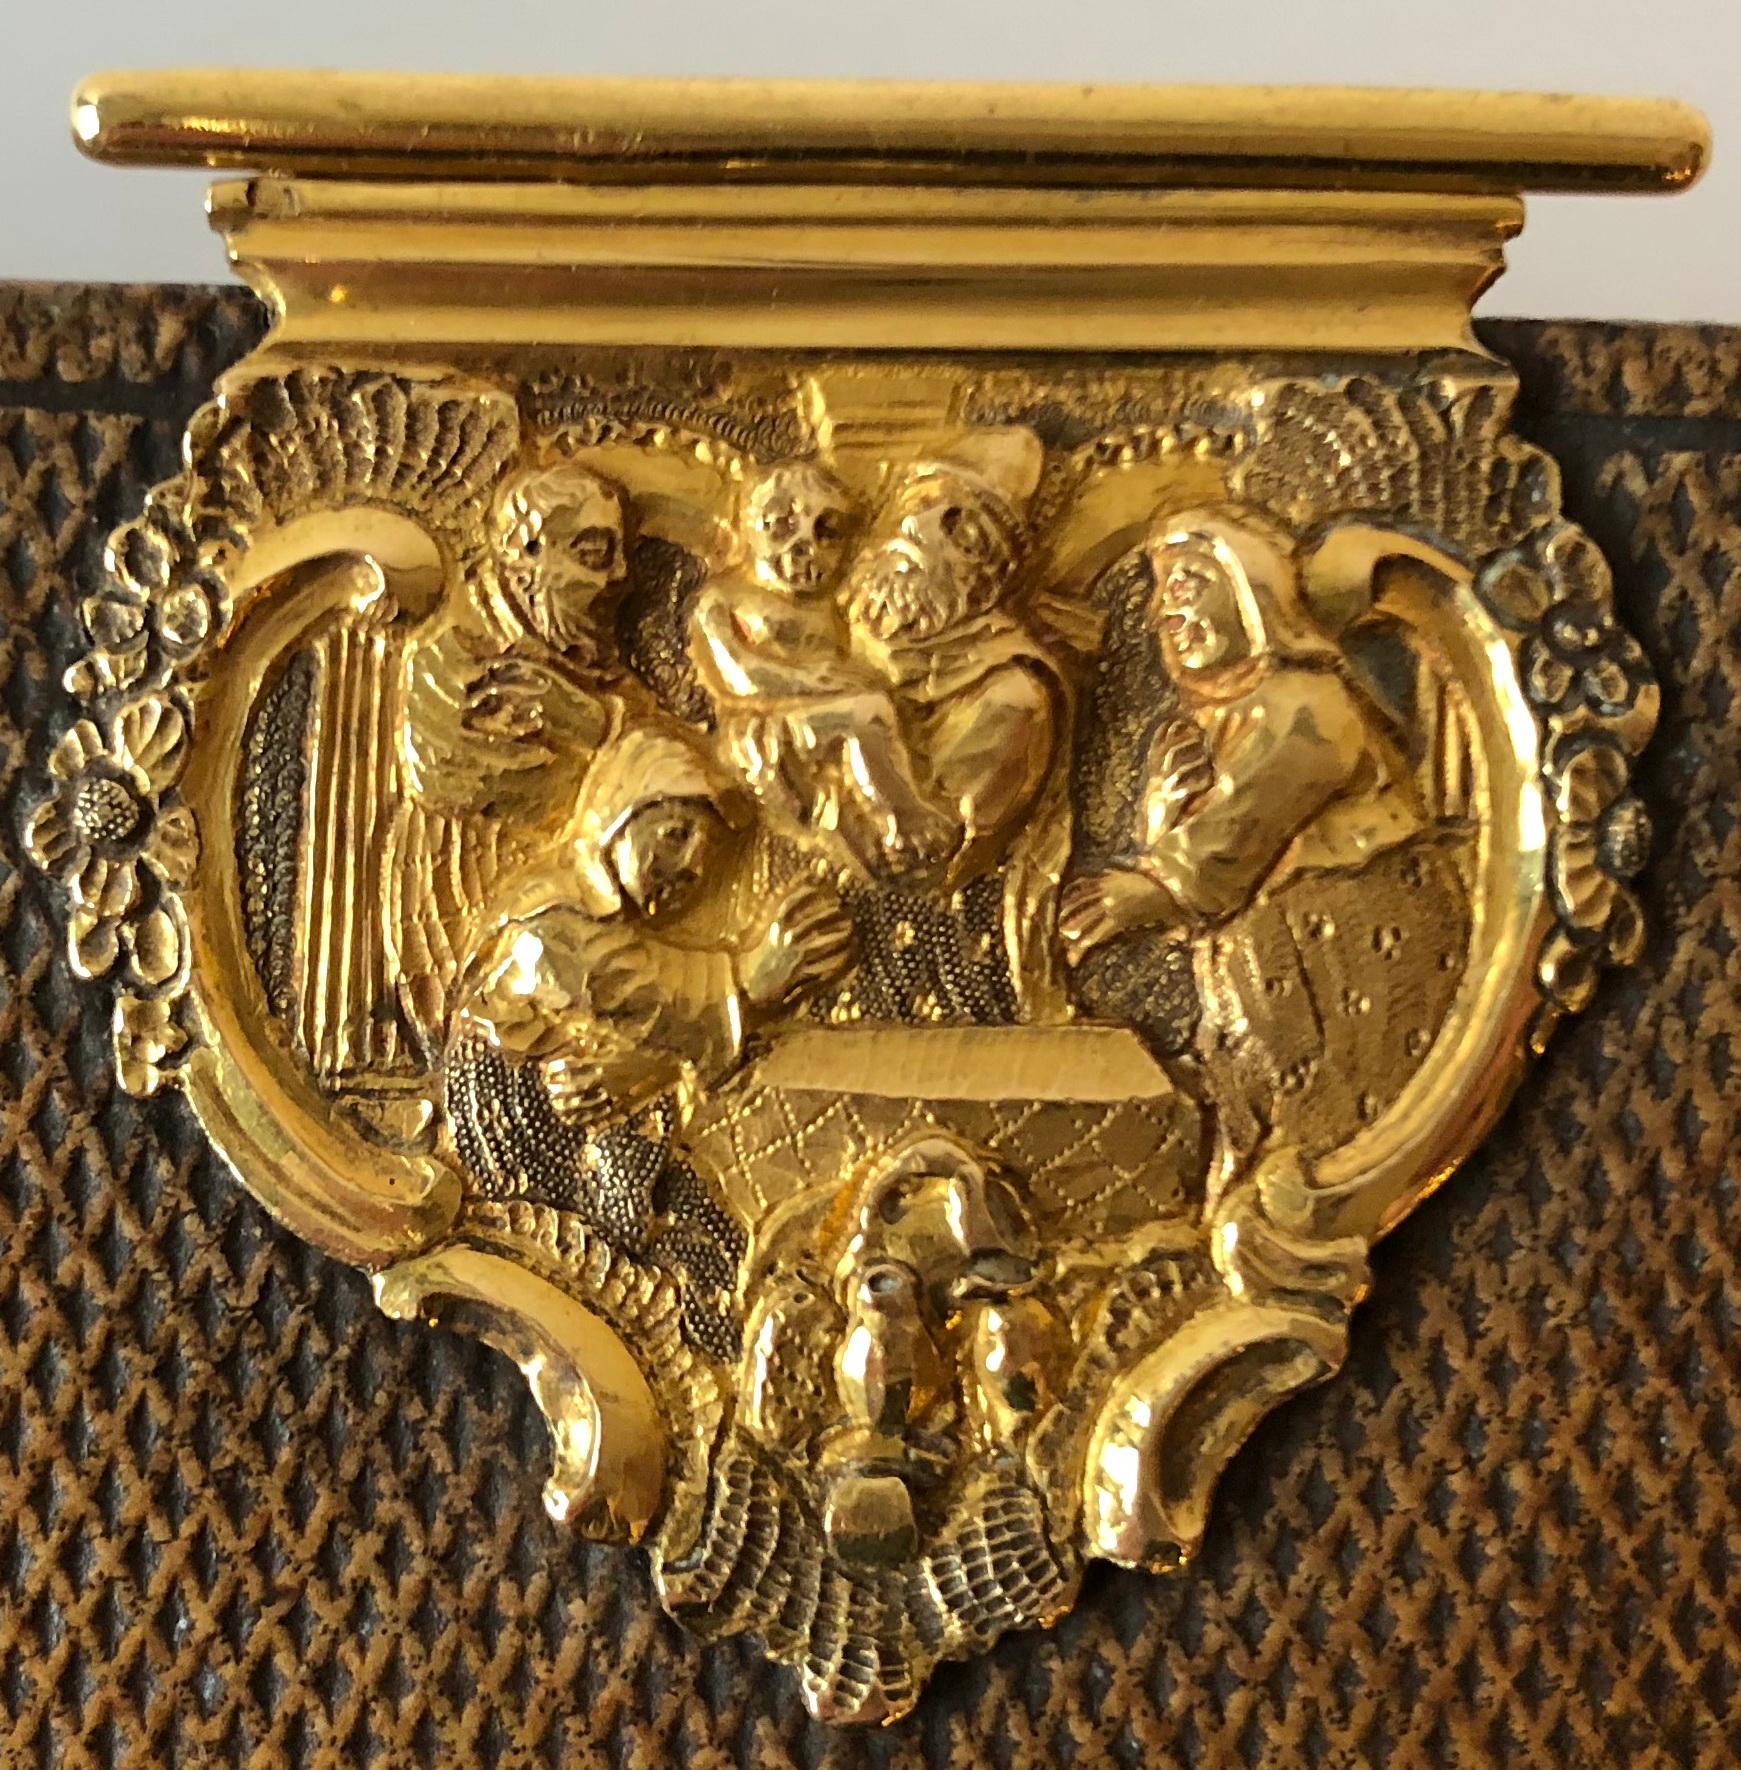 Embossed Dutch Bible with Gold Bookclasps